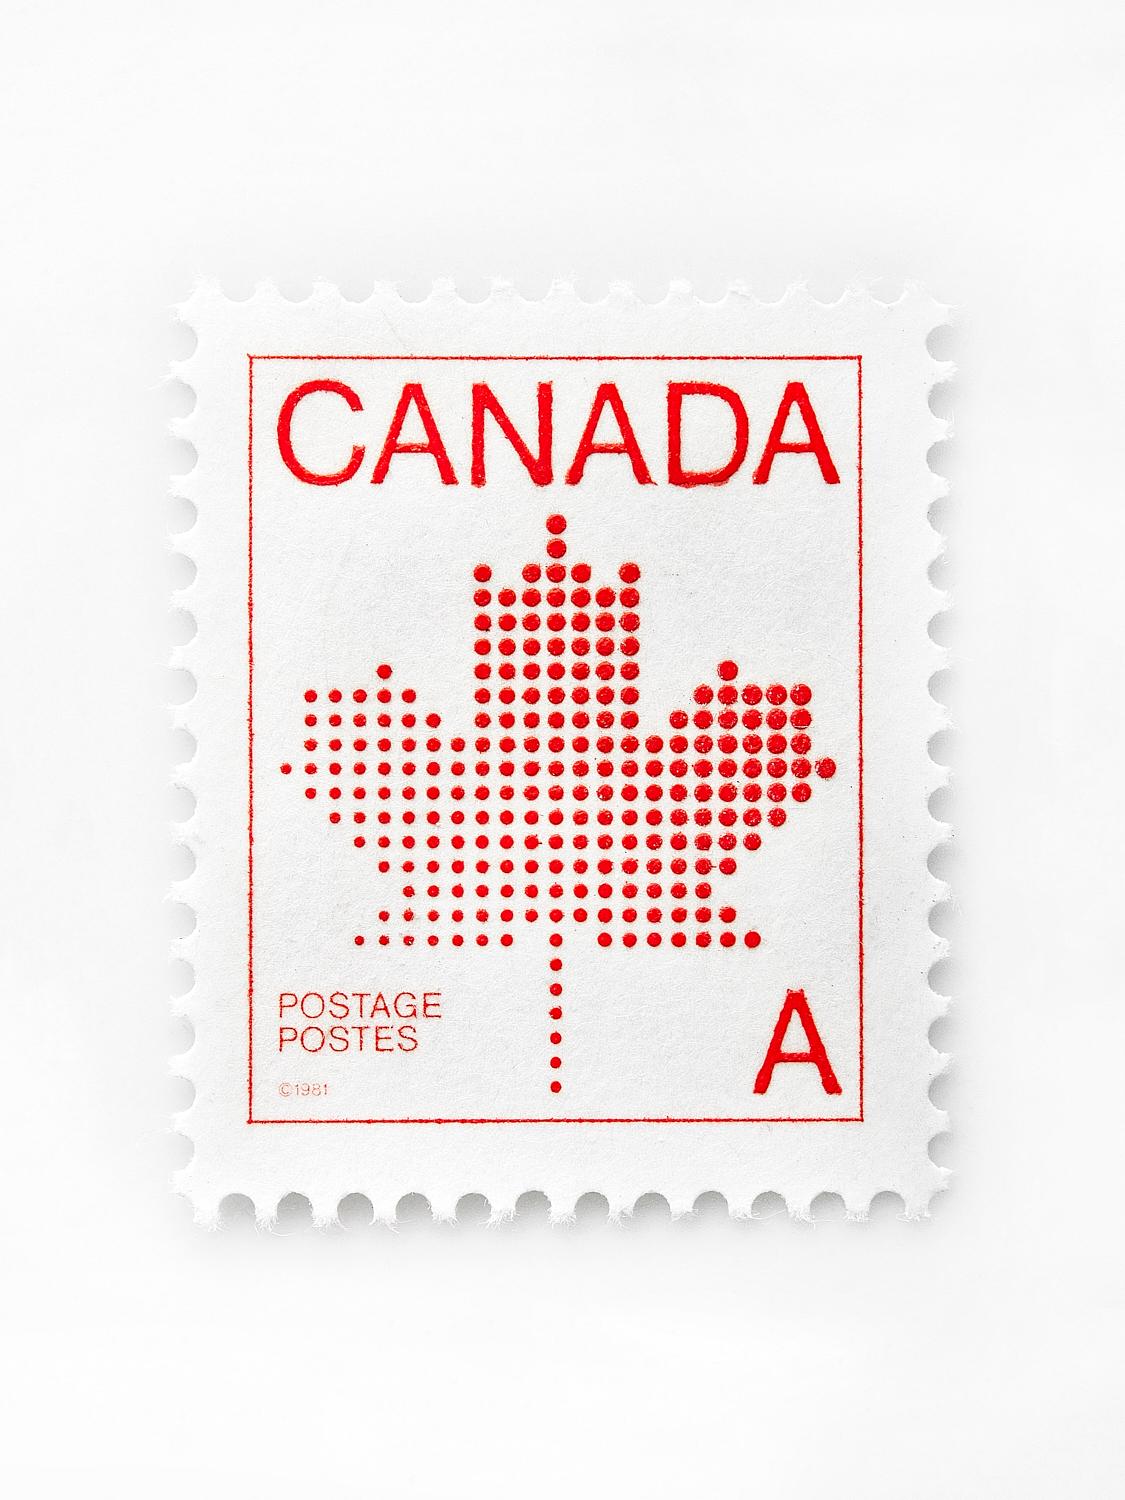 Canada "A" Stamp
Digital C-Print / Archival Pigment Print
Edition of 20 per size
Available sizes:
48 x 36

“Collectible” series is a macro level exploration of coins, bills and stamps. These images are created with the intention of being reproduced